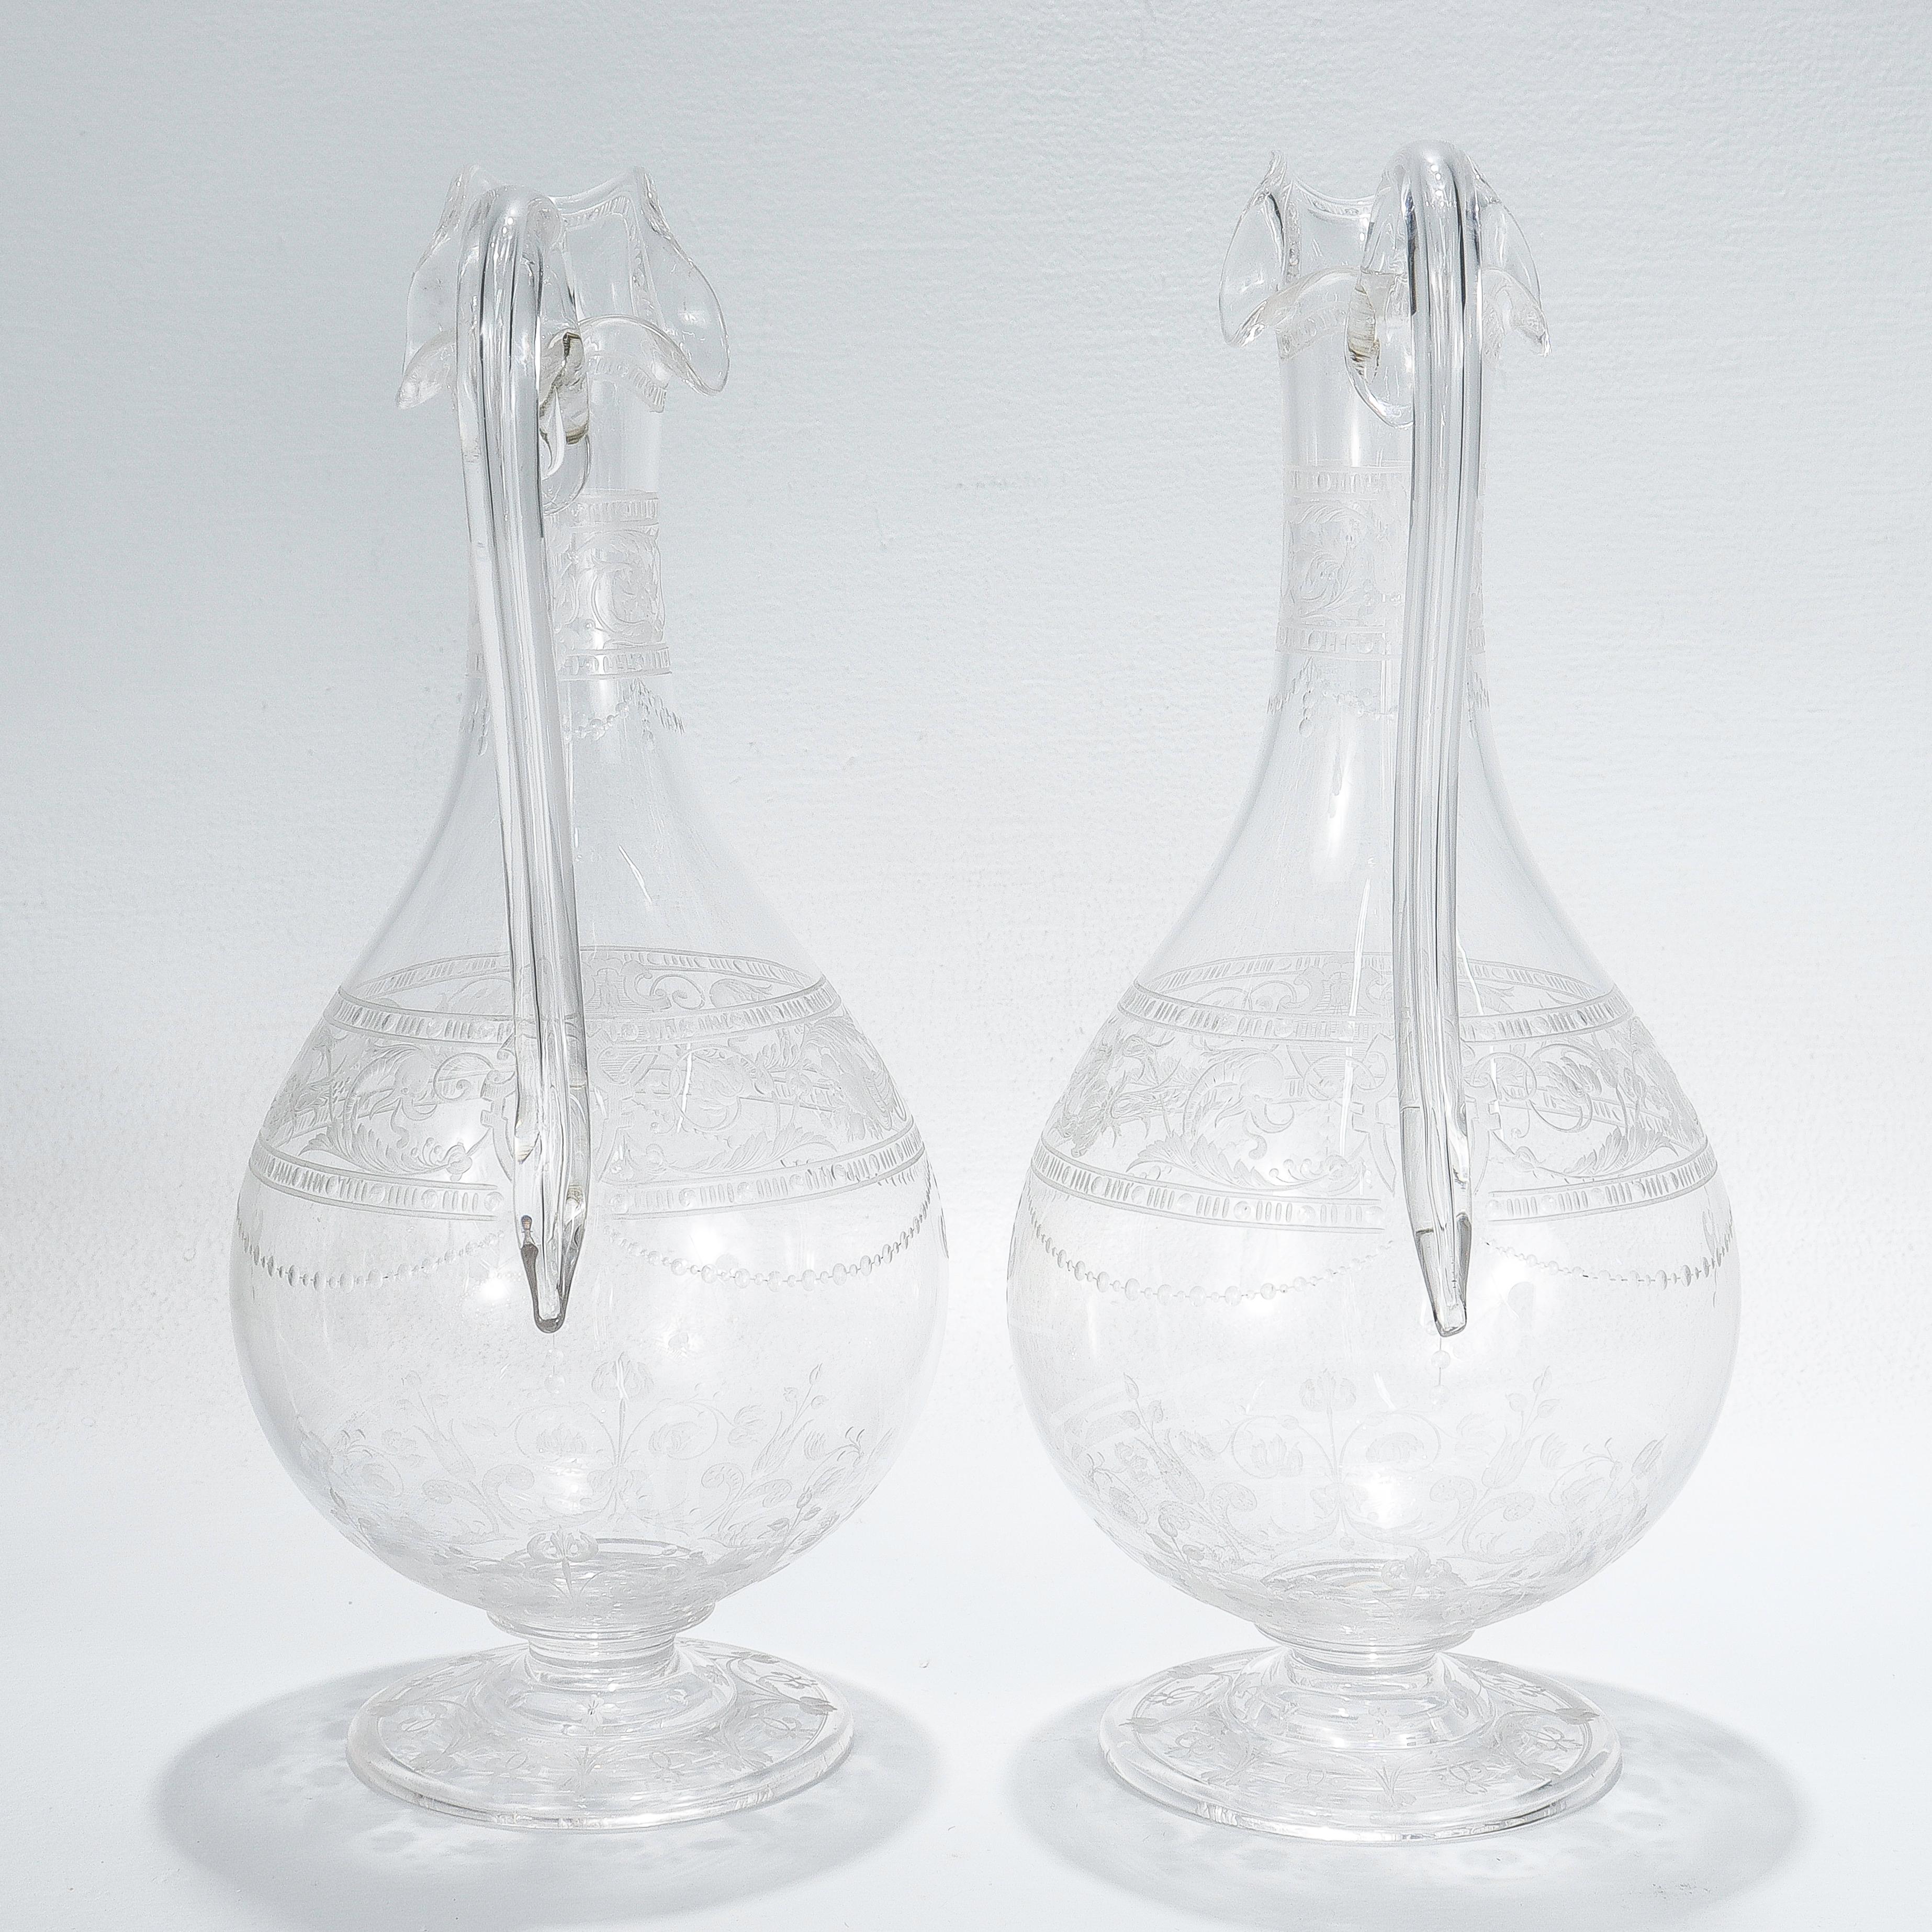 Pair of Antique Stourbridge Etched & Engraved Glass Water Pitchers or Decanters In Good Condition For Sale In Philadelphia, PA